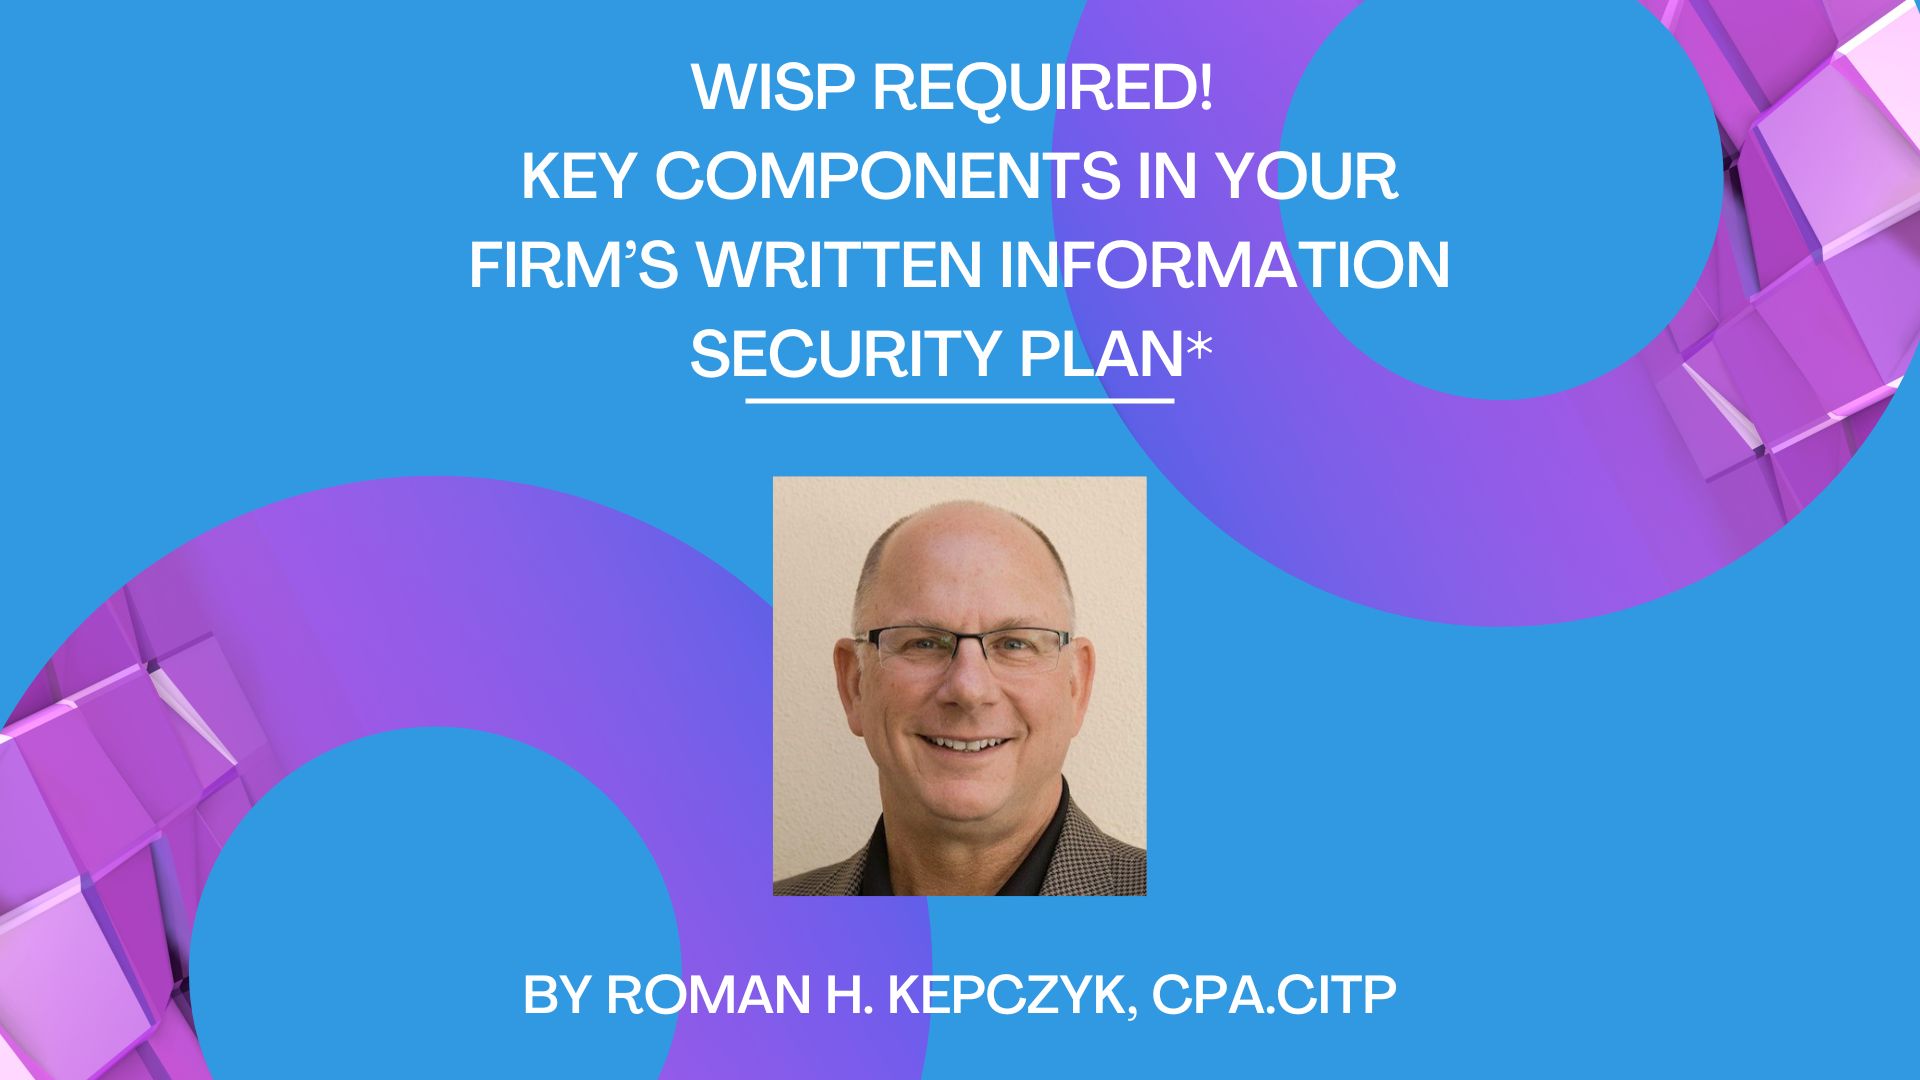 WISP Required! Key Components in Your Firm’s Written Information Security Plan*